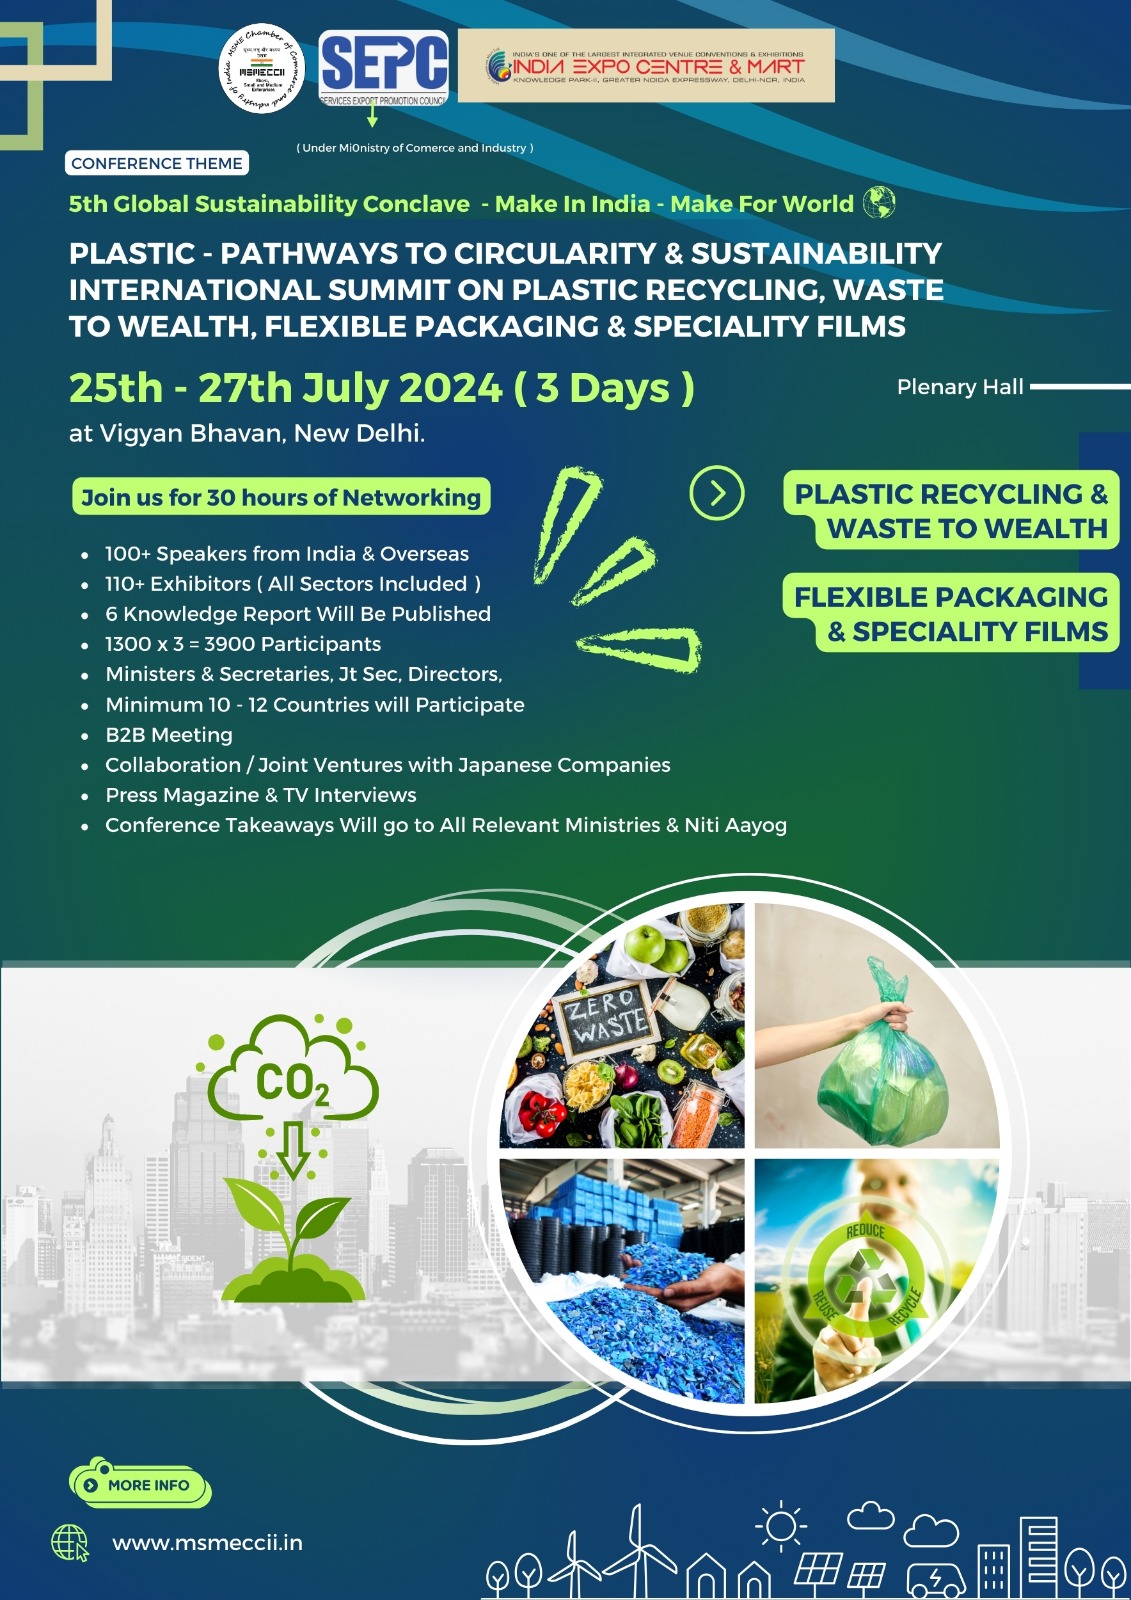 Flexible Recycling & Speciality Films